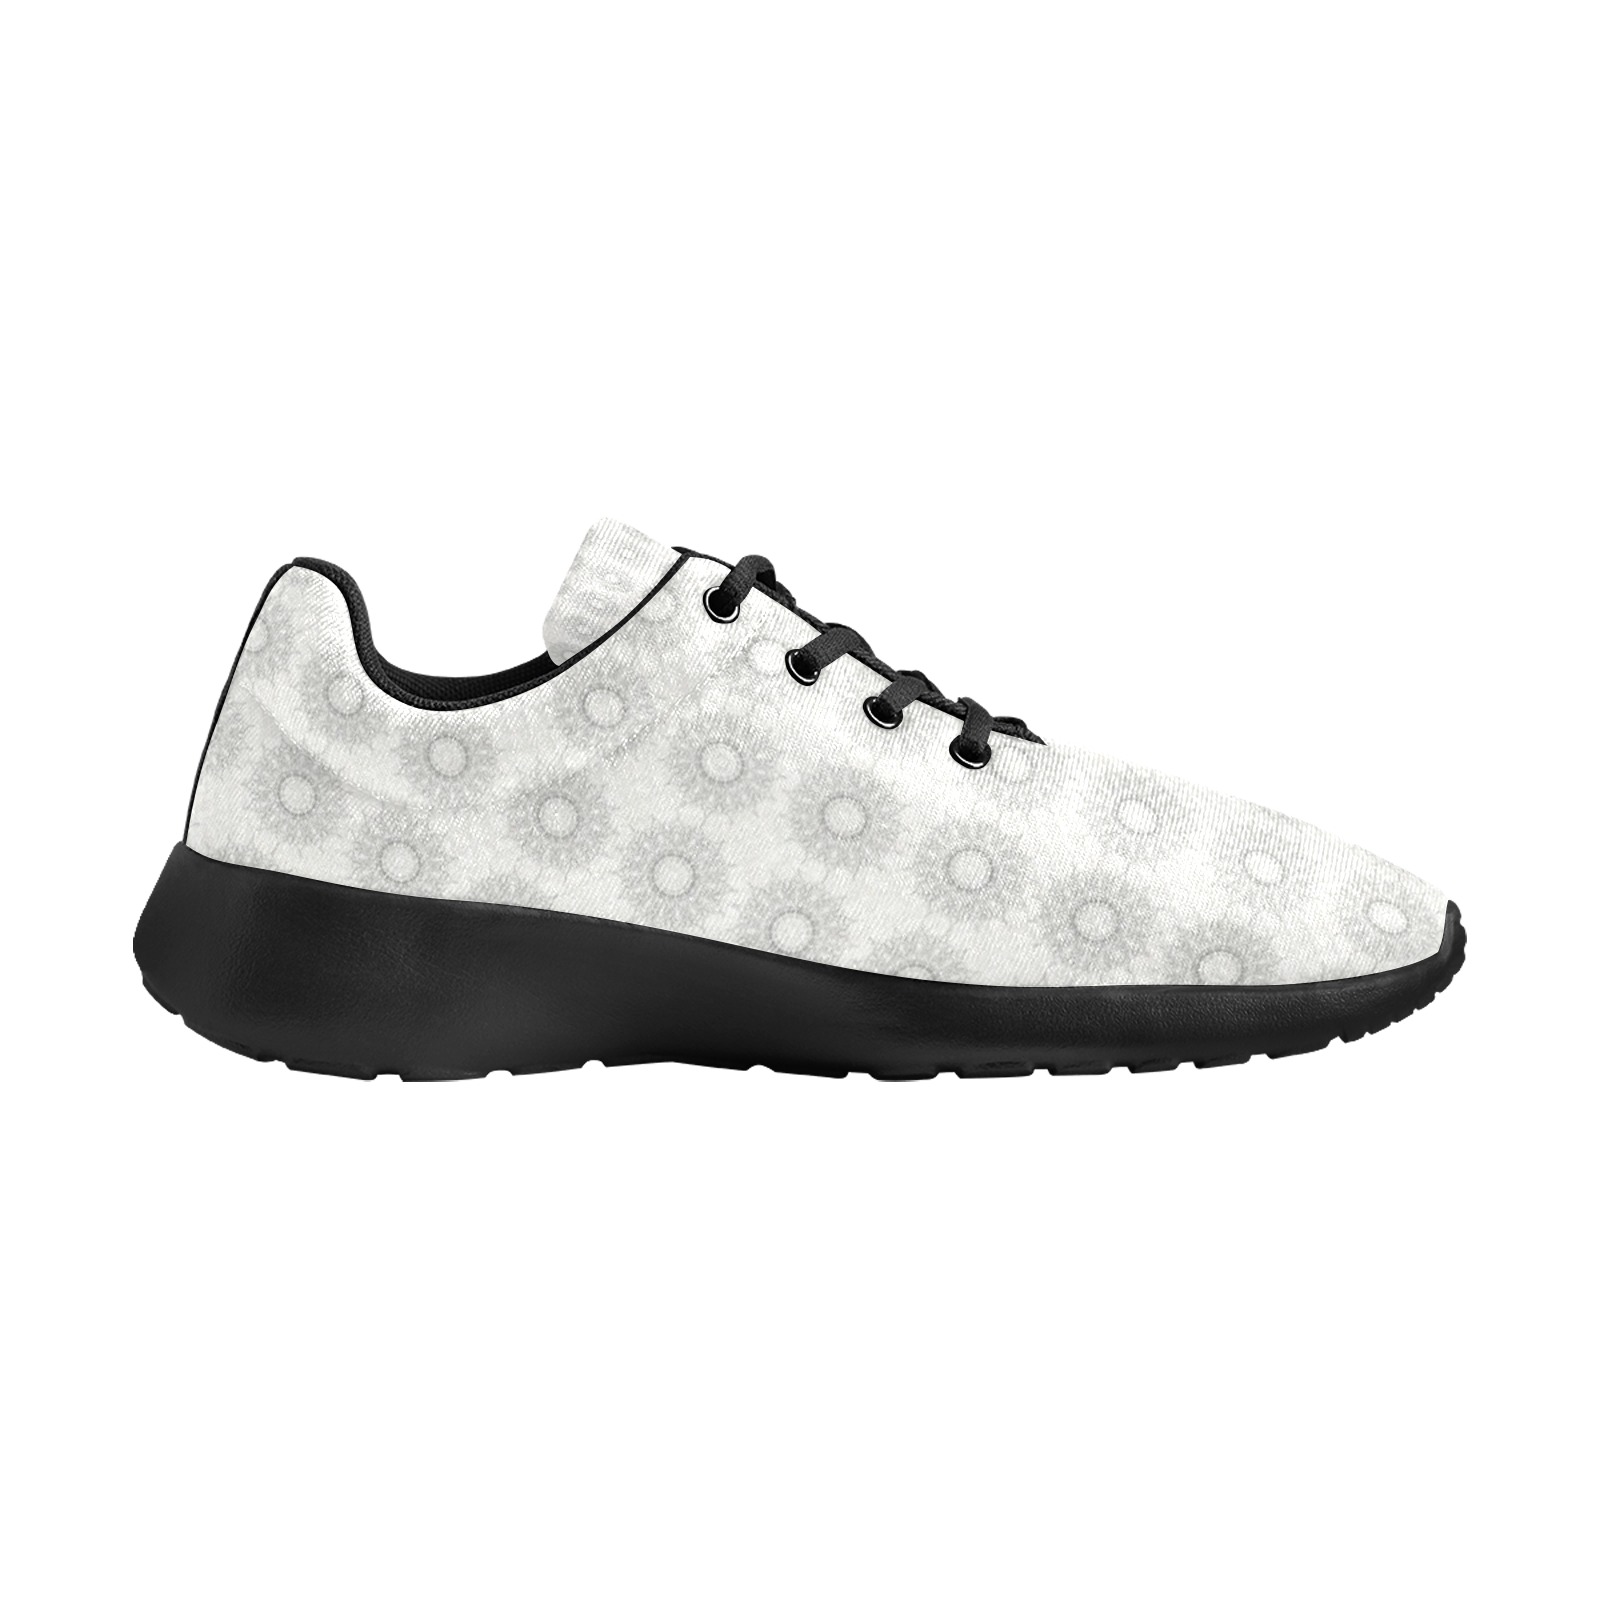 Little white floral fallen to the rural pattern Men's Athletic Shoes (Model 0200)